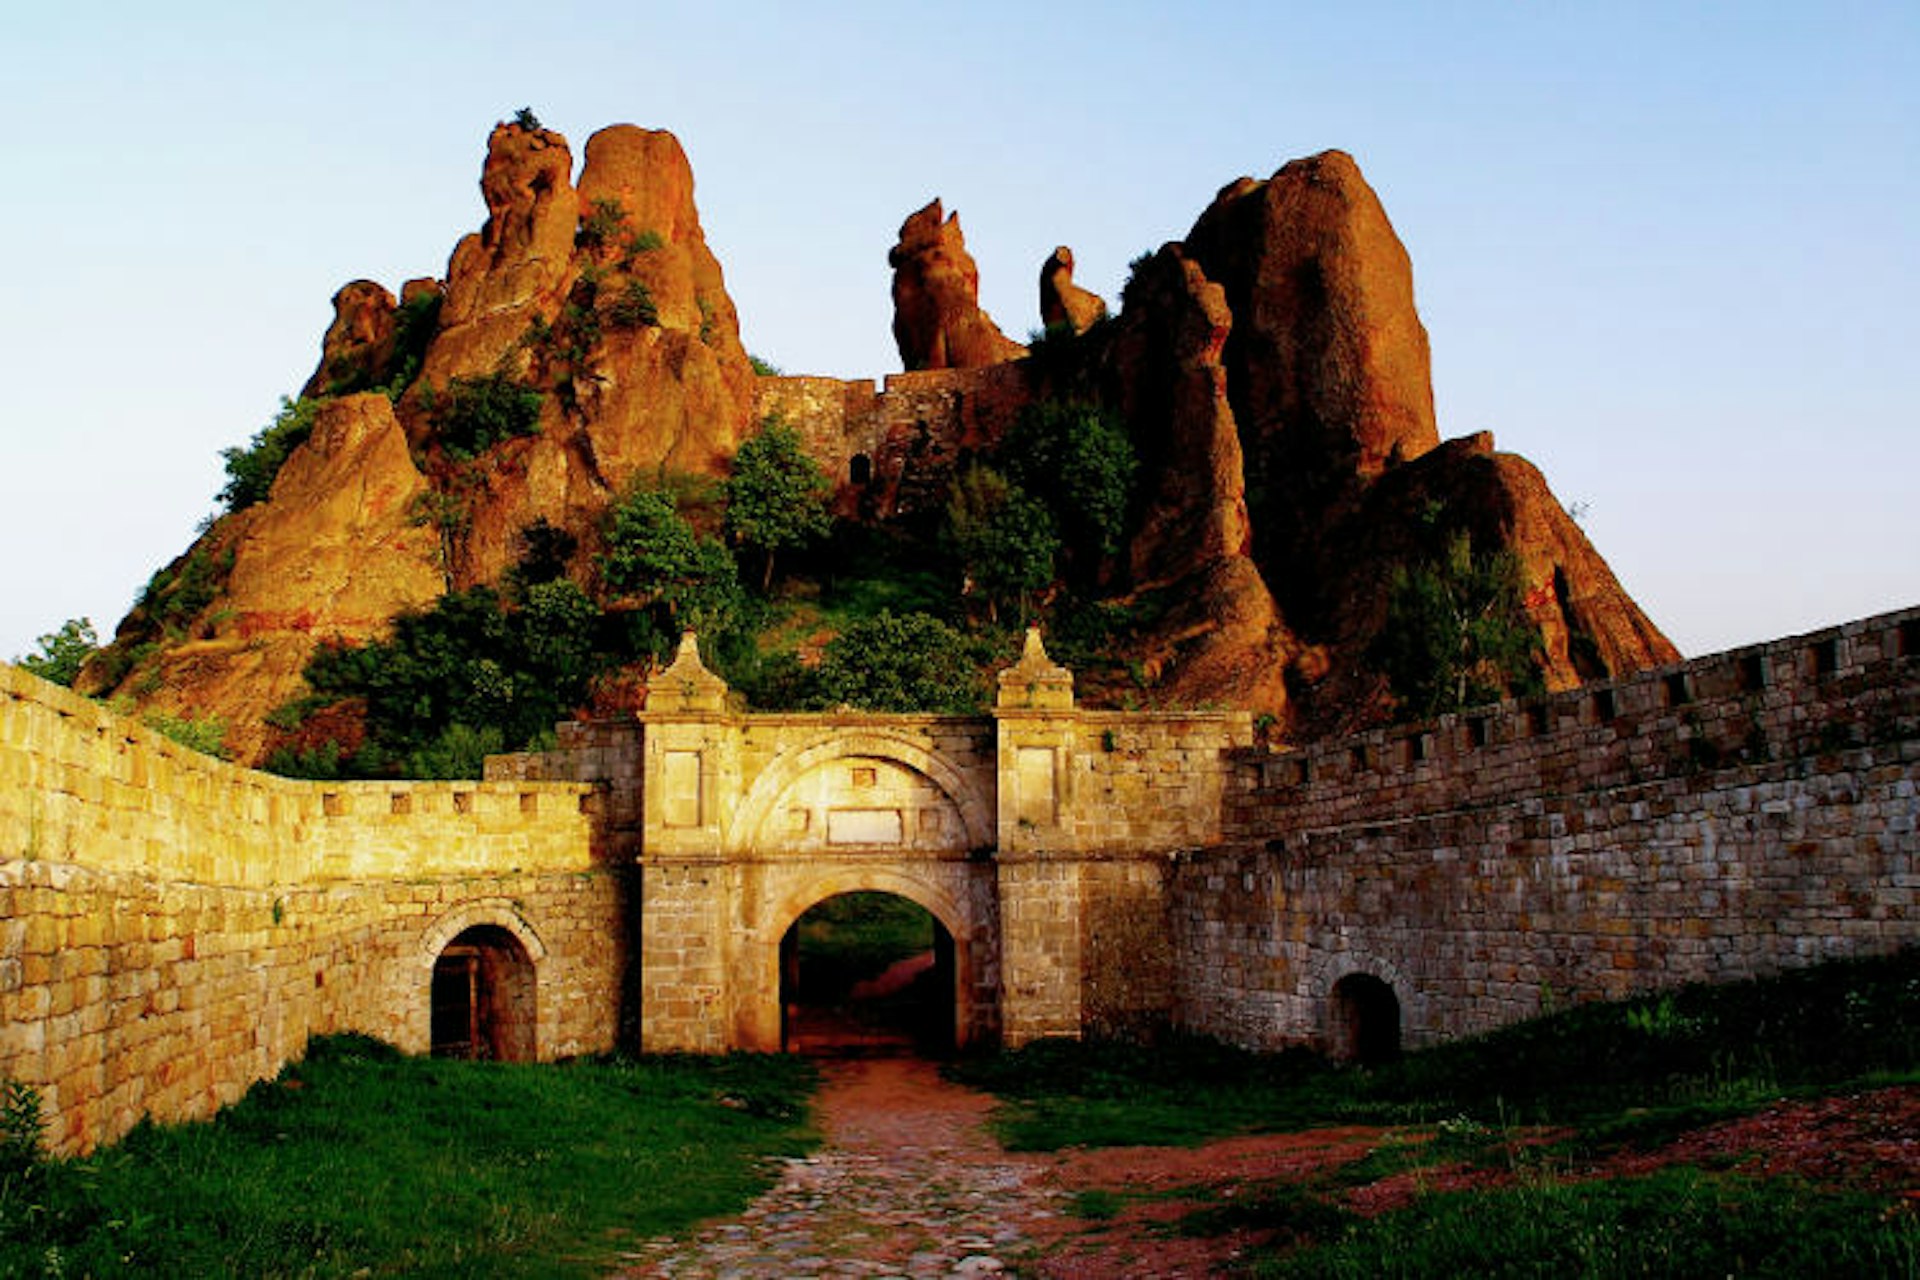 Belogradchik Fortress is guarded by an eerie rock tower. Image by Dimitar Sotirov / Getty Images